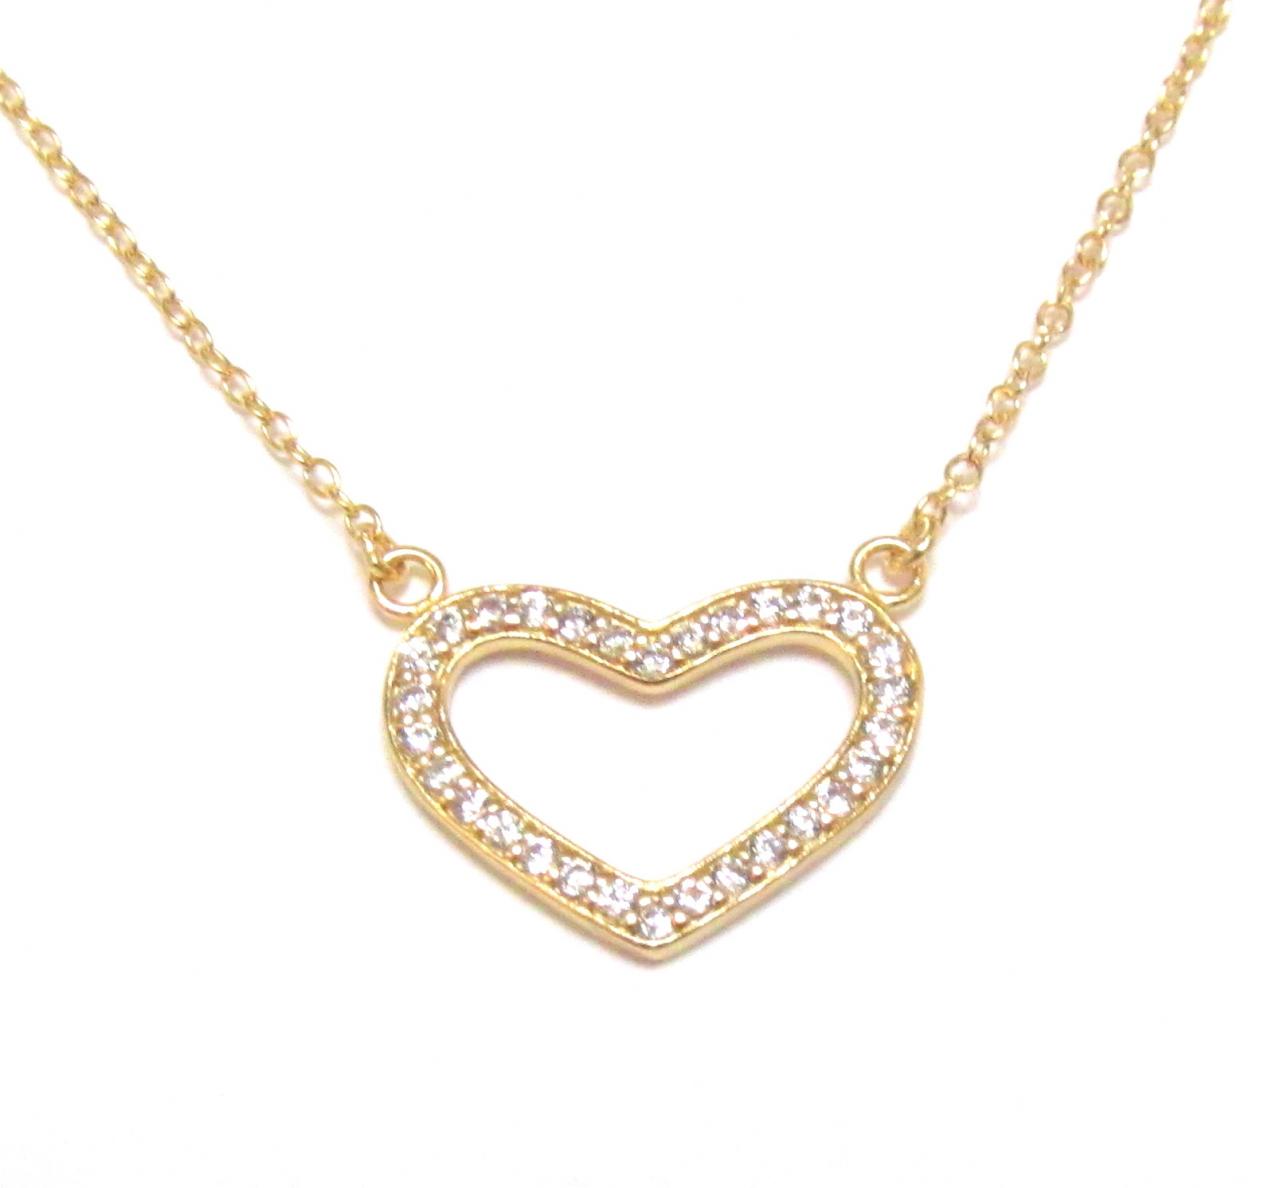 Heart Necklace - 14 Kt Gold Over 925 Sterling Silver Open Heart Necklace With Cz On A 18" Chain